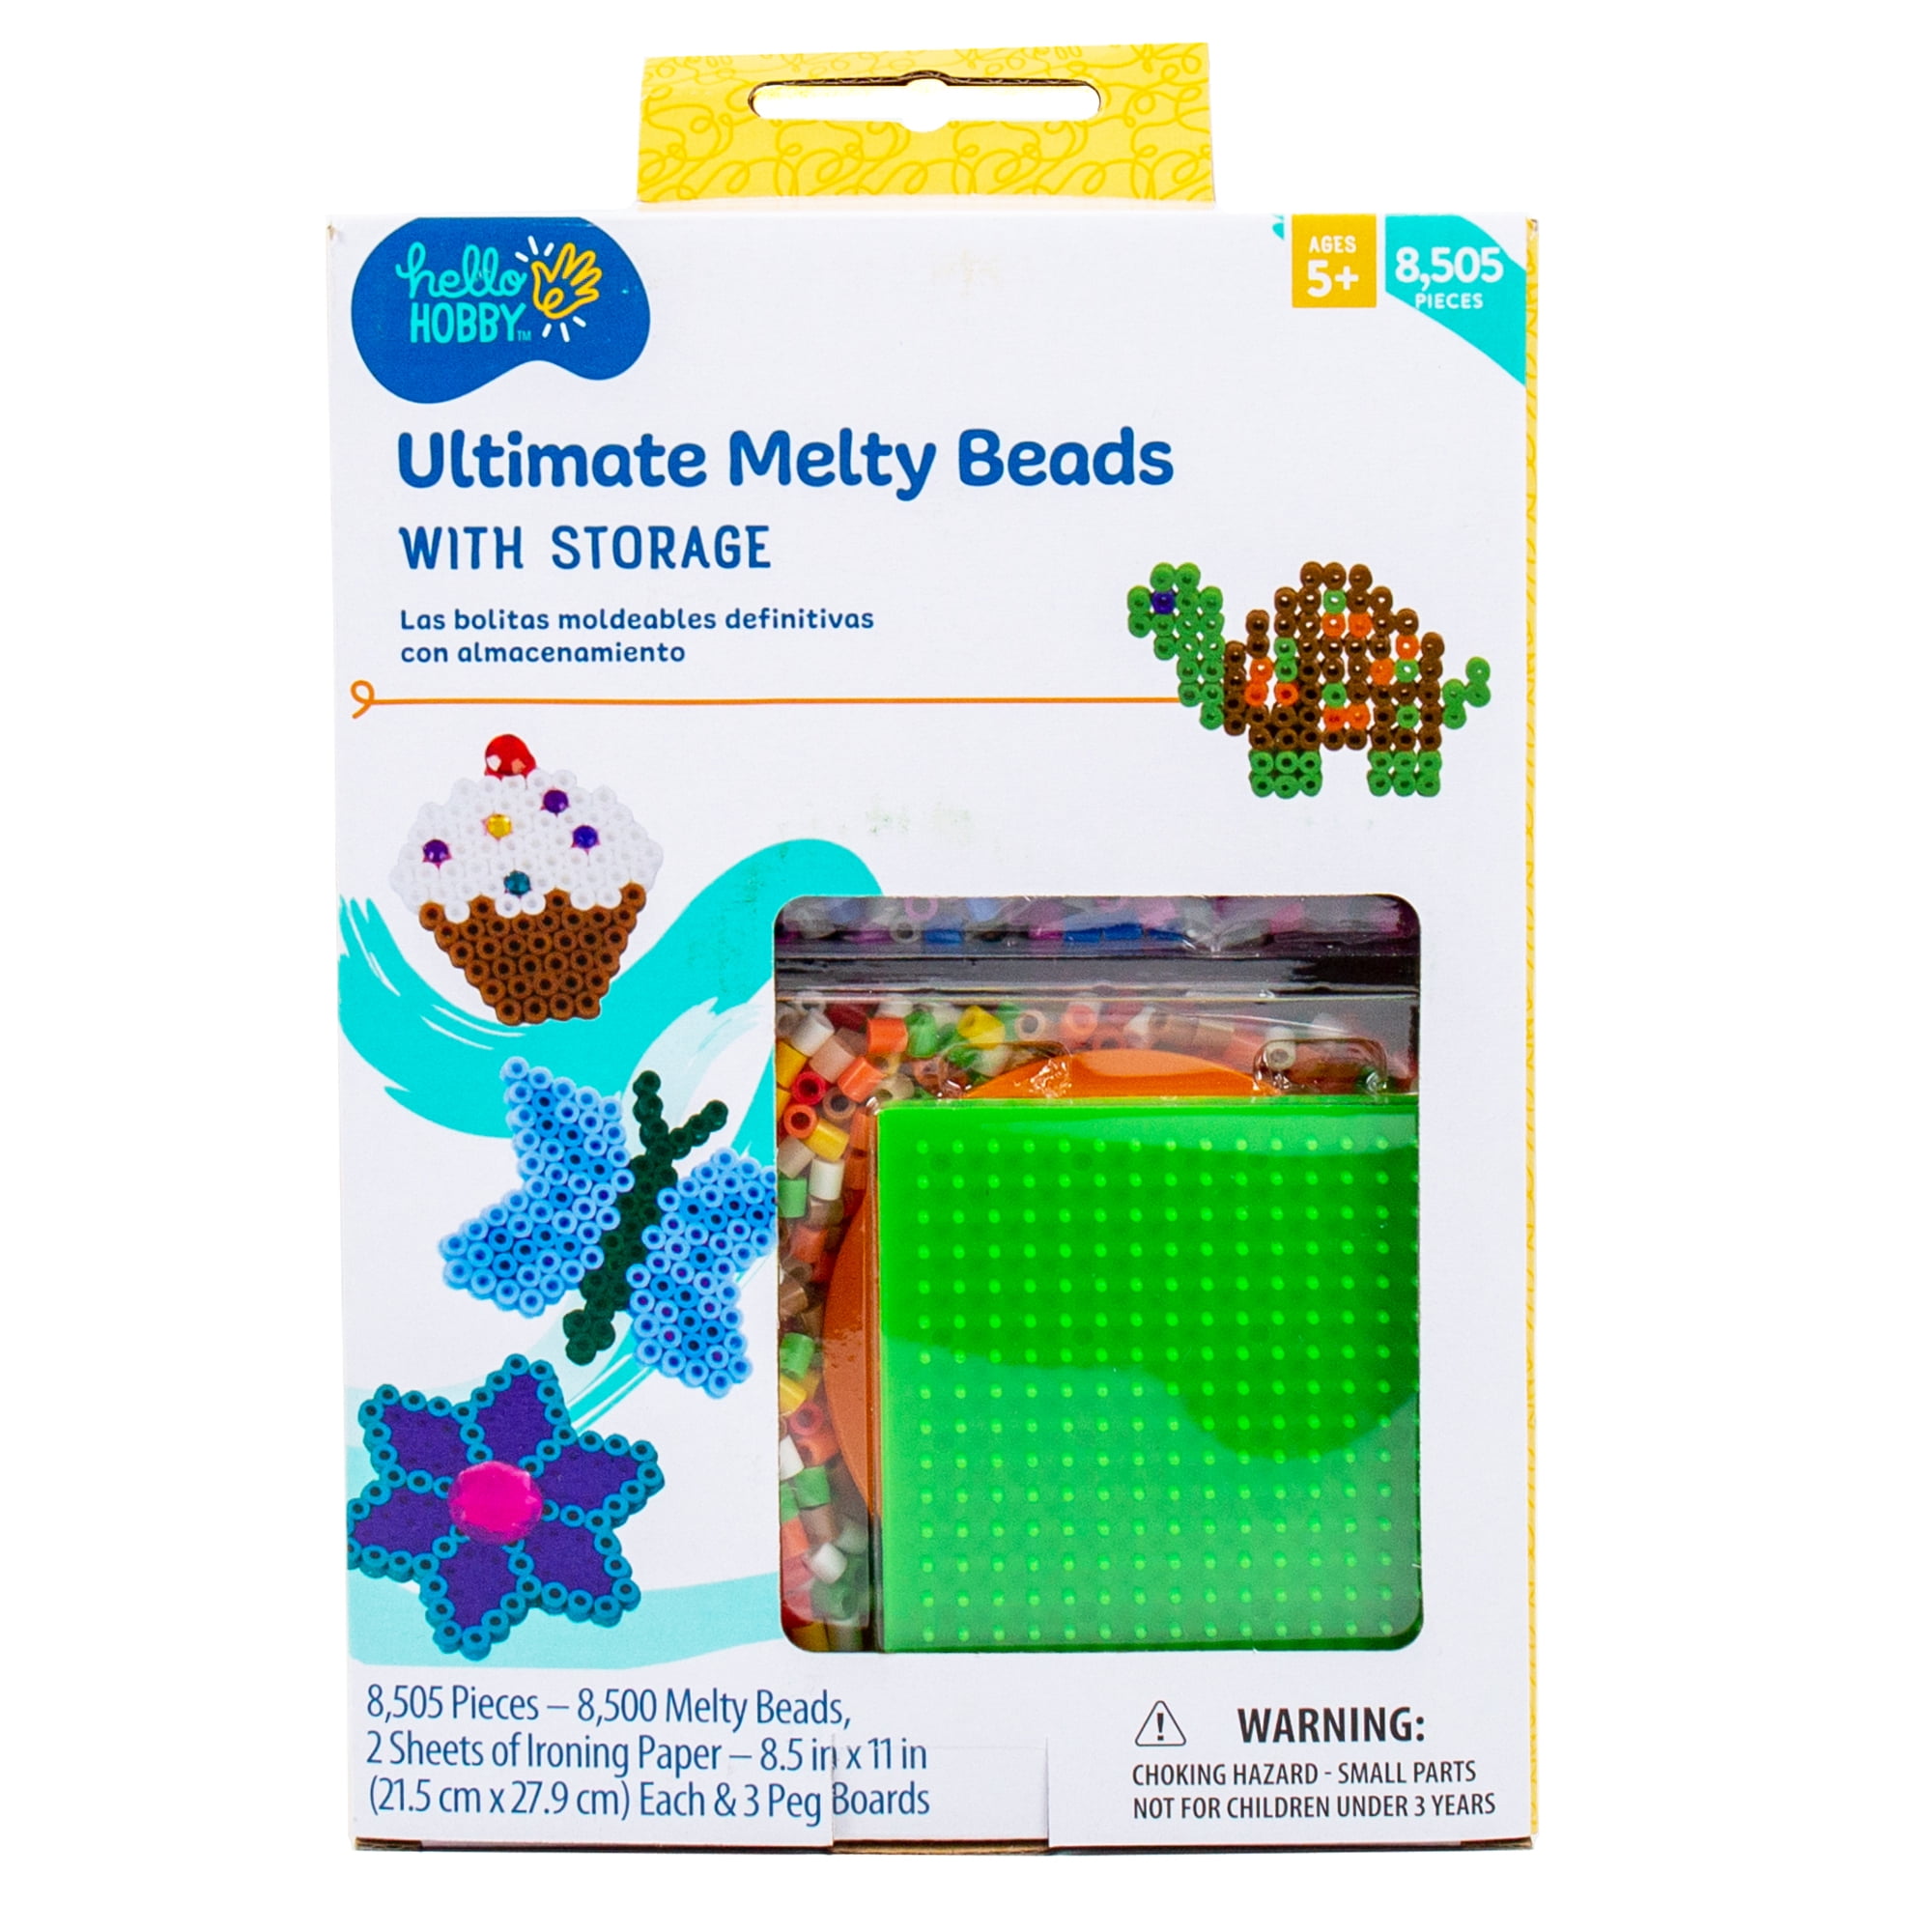 Get the latest collection of Art Star Melty Beads Activity Kit